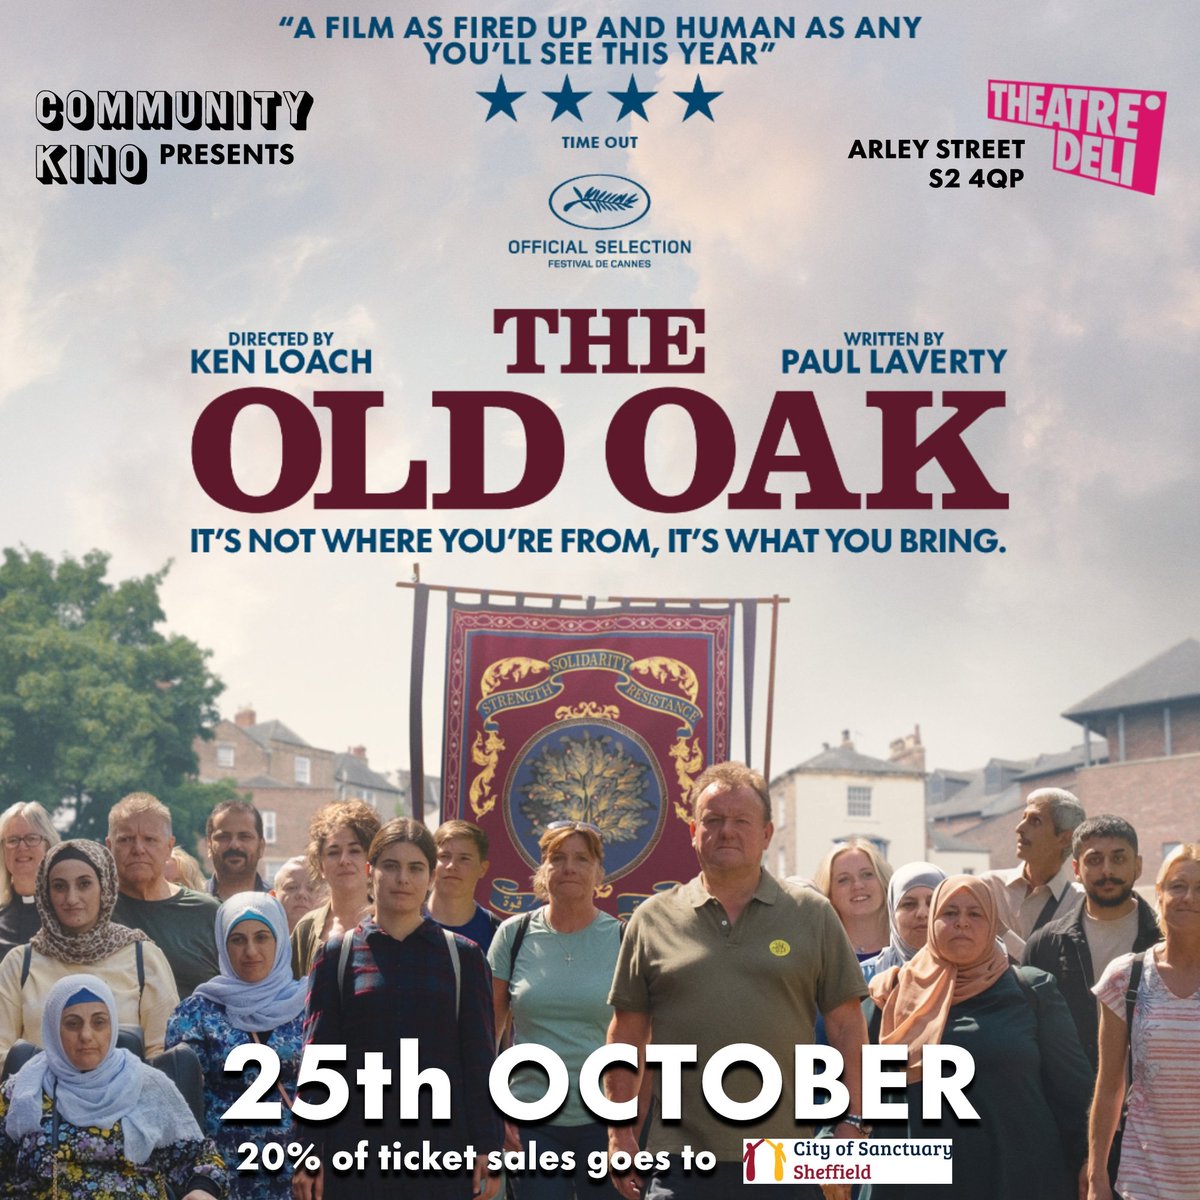 📢 We are really happy to announce we are hosting a screening of Ken Loach's new film 'The Old Oak' 🎟 Grab yourself a ticket now as they will go very fast - 20% of ticket sales goes to @SheffCityofSanc 📅 Weds 25th October 7pm 📌 @theatredelishef {Ticket link in bio}